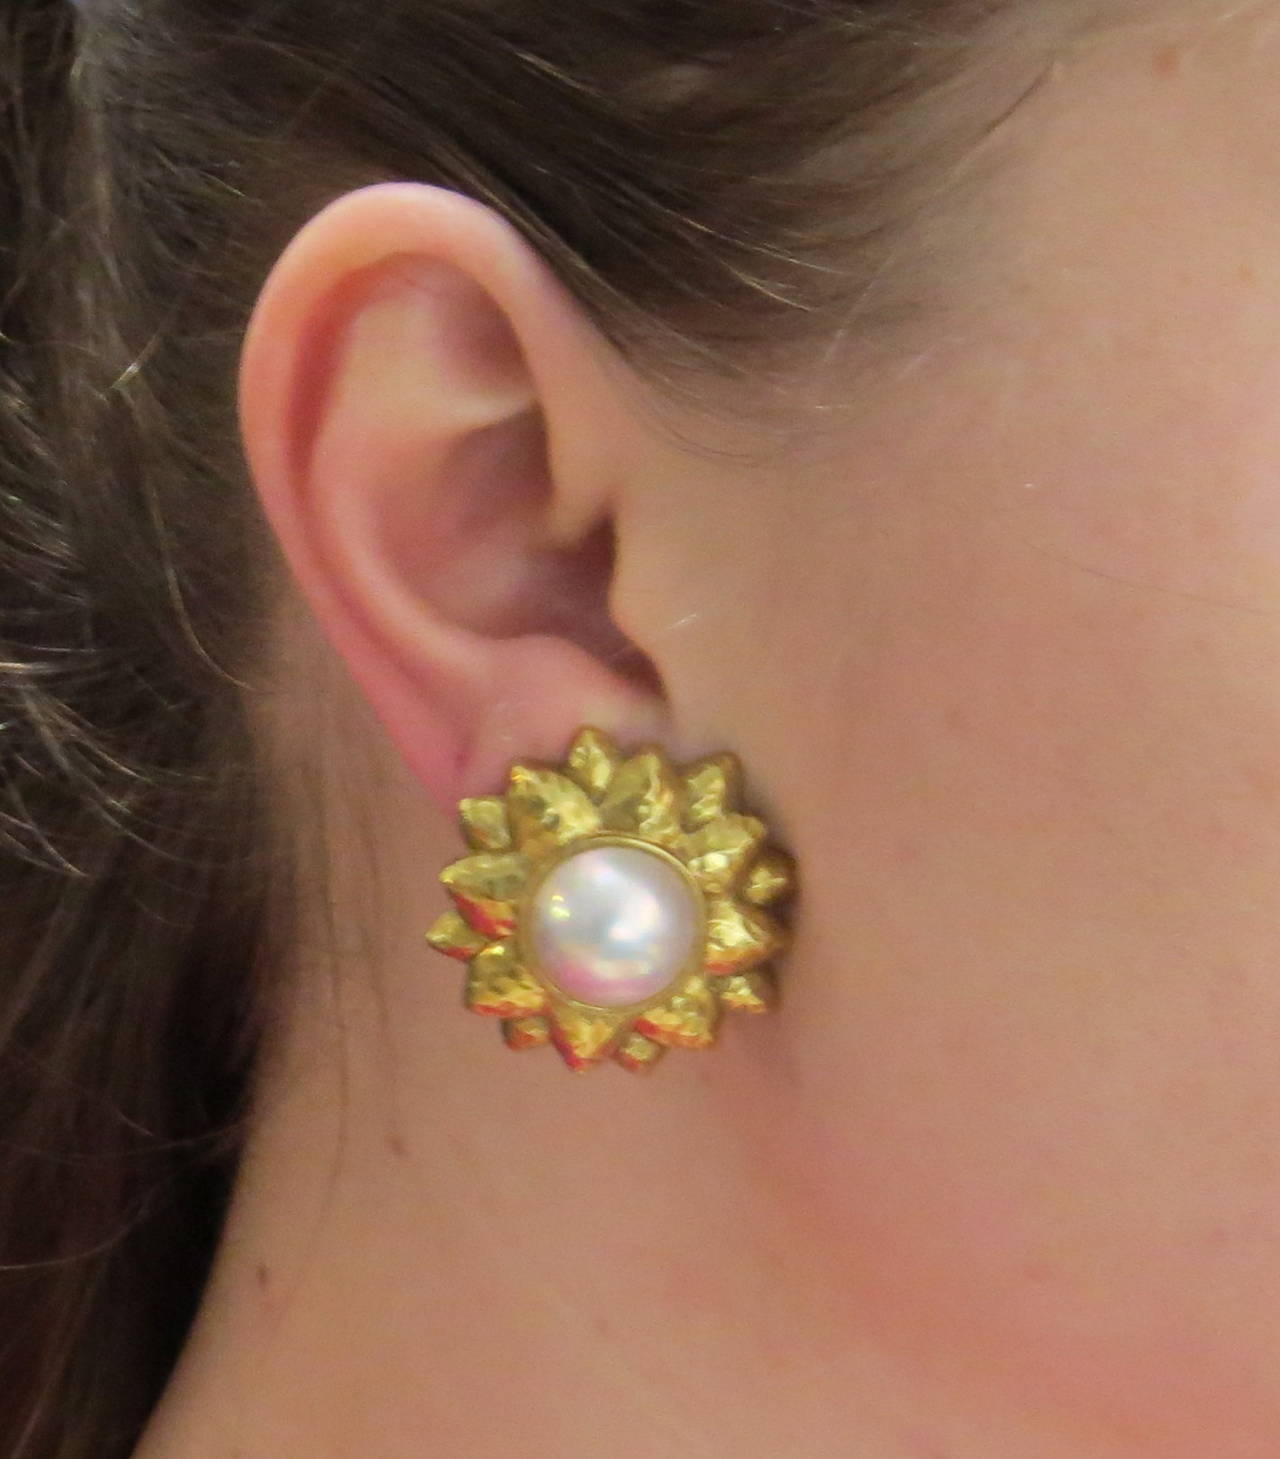 18k hammered gold earrings, set with 13.8mm mabe pearls, featuring sunflower design. Earrings measure 30mm in diameter. Weight - 31.9 grams